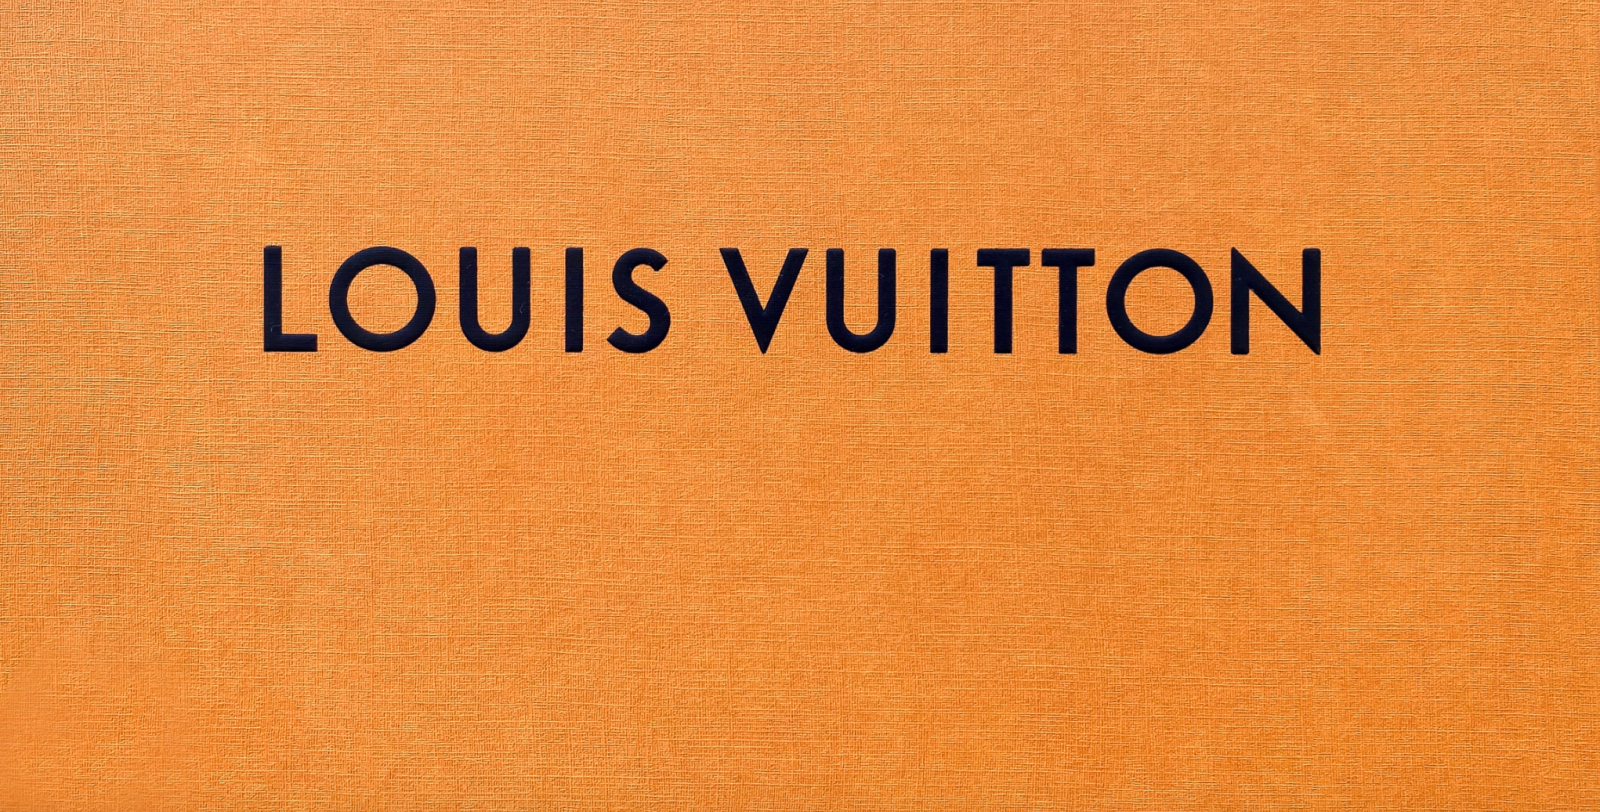 Louis Vuitton owner emerges as ESG magnet with $17 billion stake